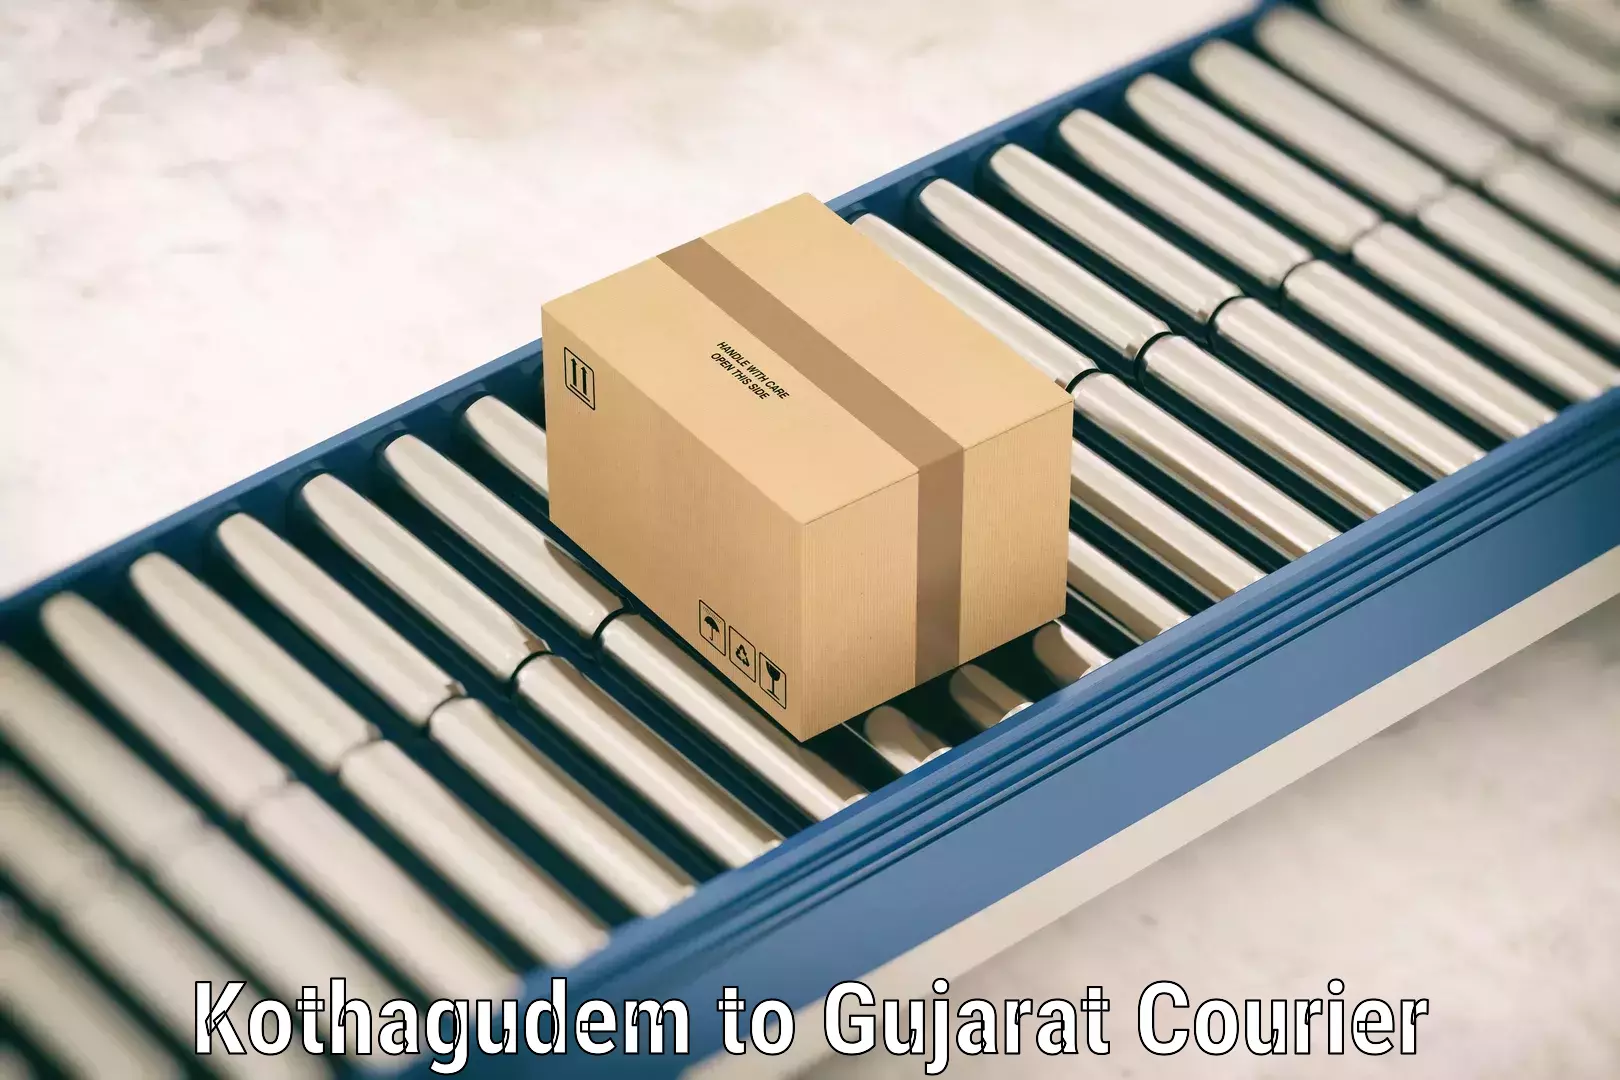 Luggage delivery providers Kothagudem to Rajkot